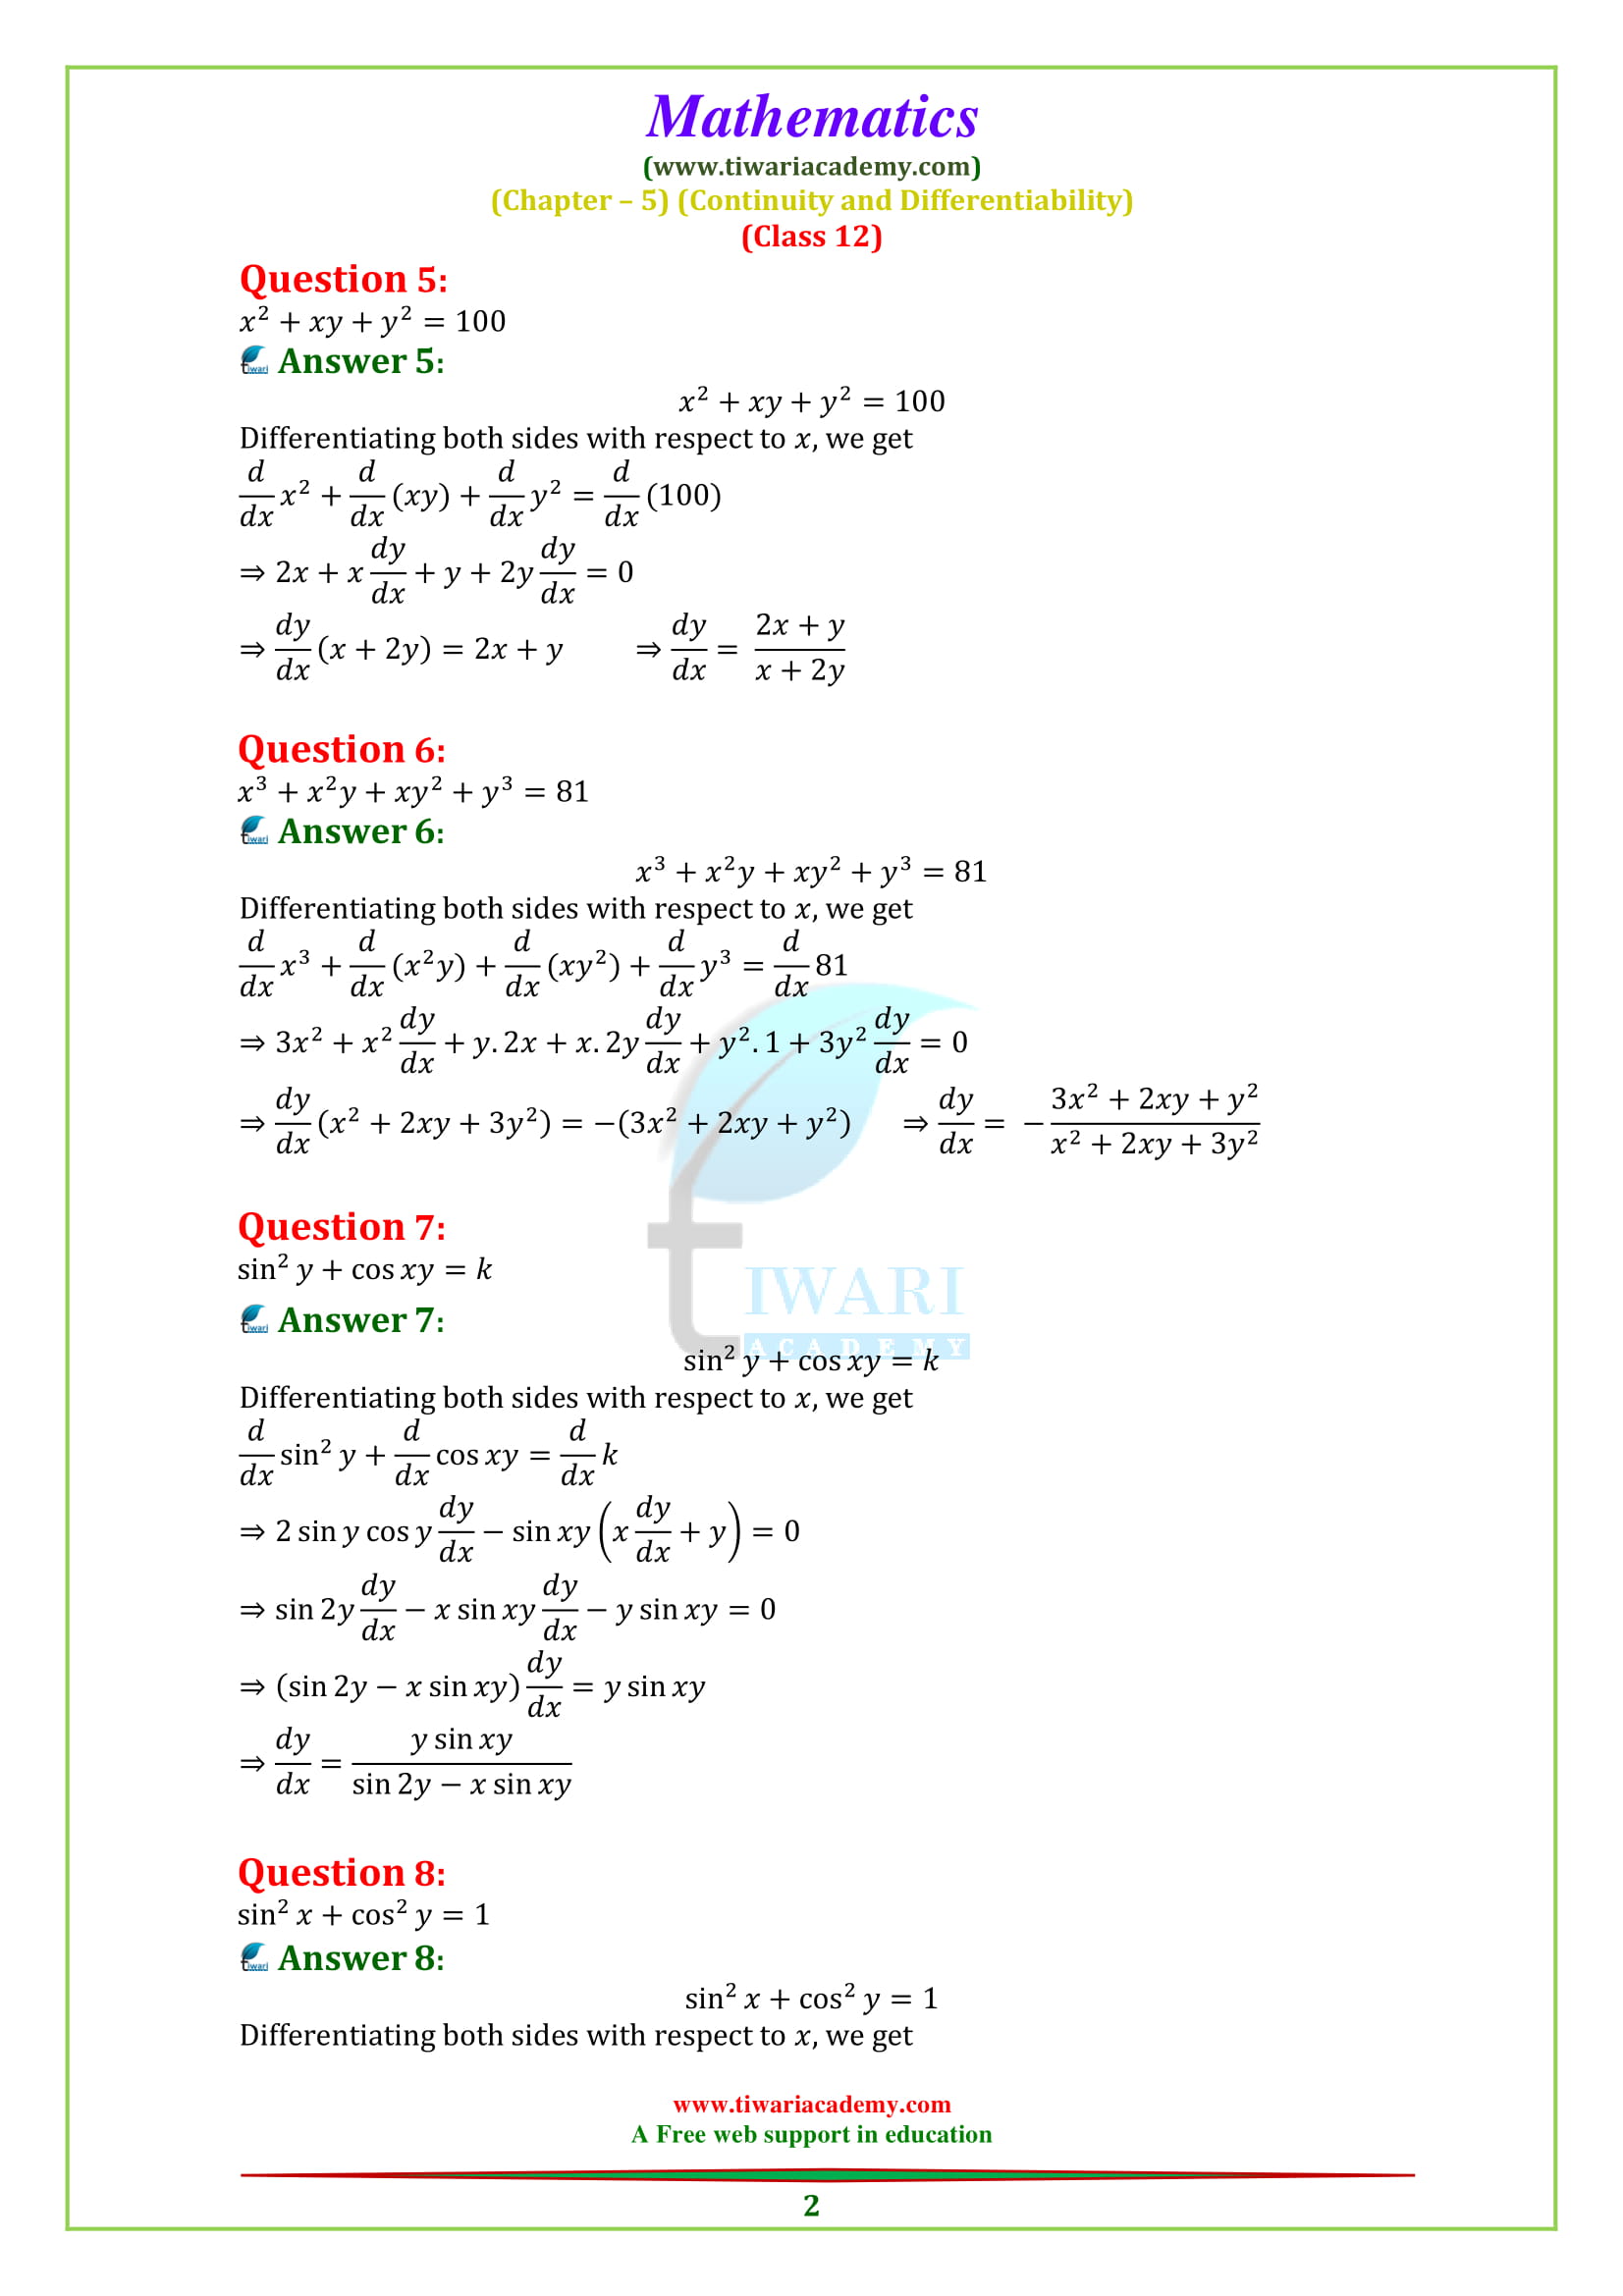 NCERT Solutions for Class 12 Maths Chapter 5 Exercise 5.3 in PDF English Medium